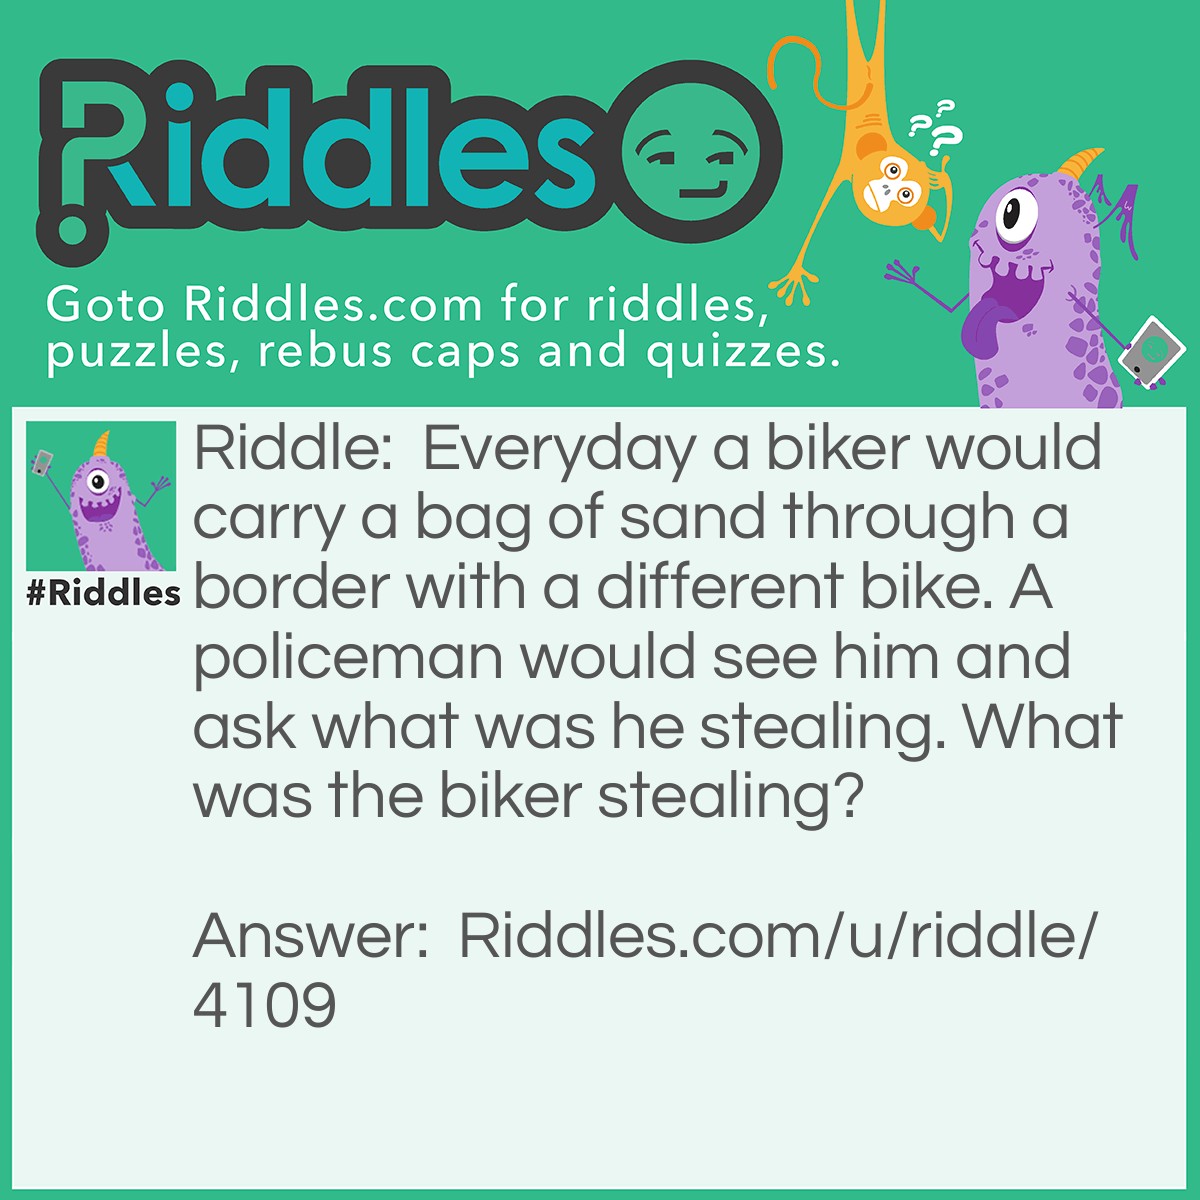 Riddle: Everyday a biker would carry a bag of sand through a border with a different bike. A policeman would see him and ask what was he stealing. What was the biker stealing? Answer: Bikes. He came to the border with a different bike everyday.